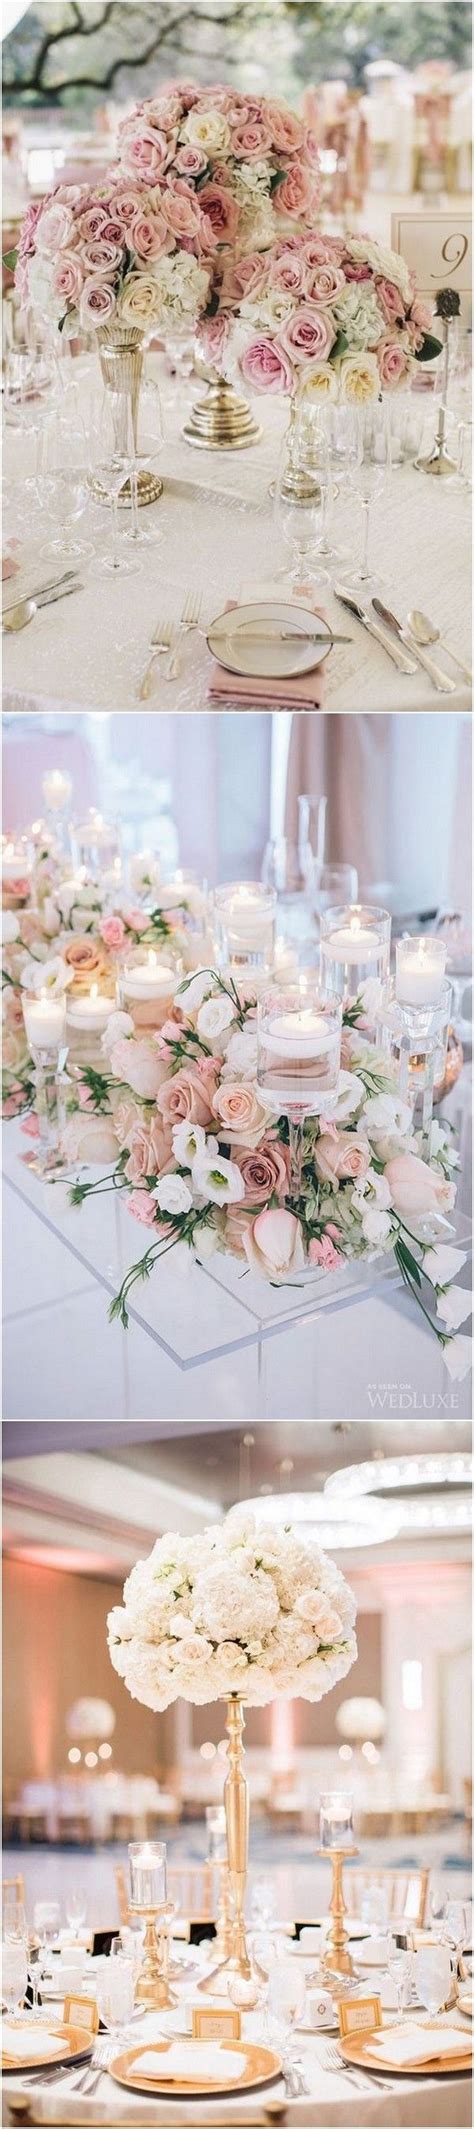 18 Elegant Blush Wedding Centerpieces For Your Big Day Page 2 Of 2